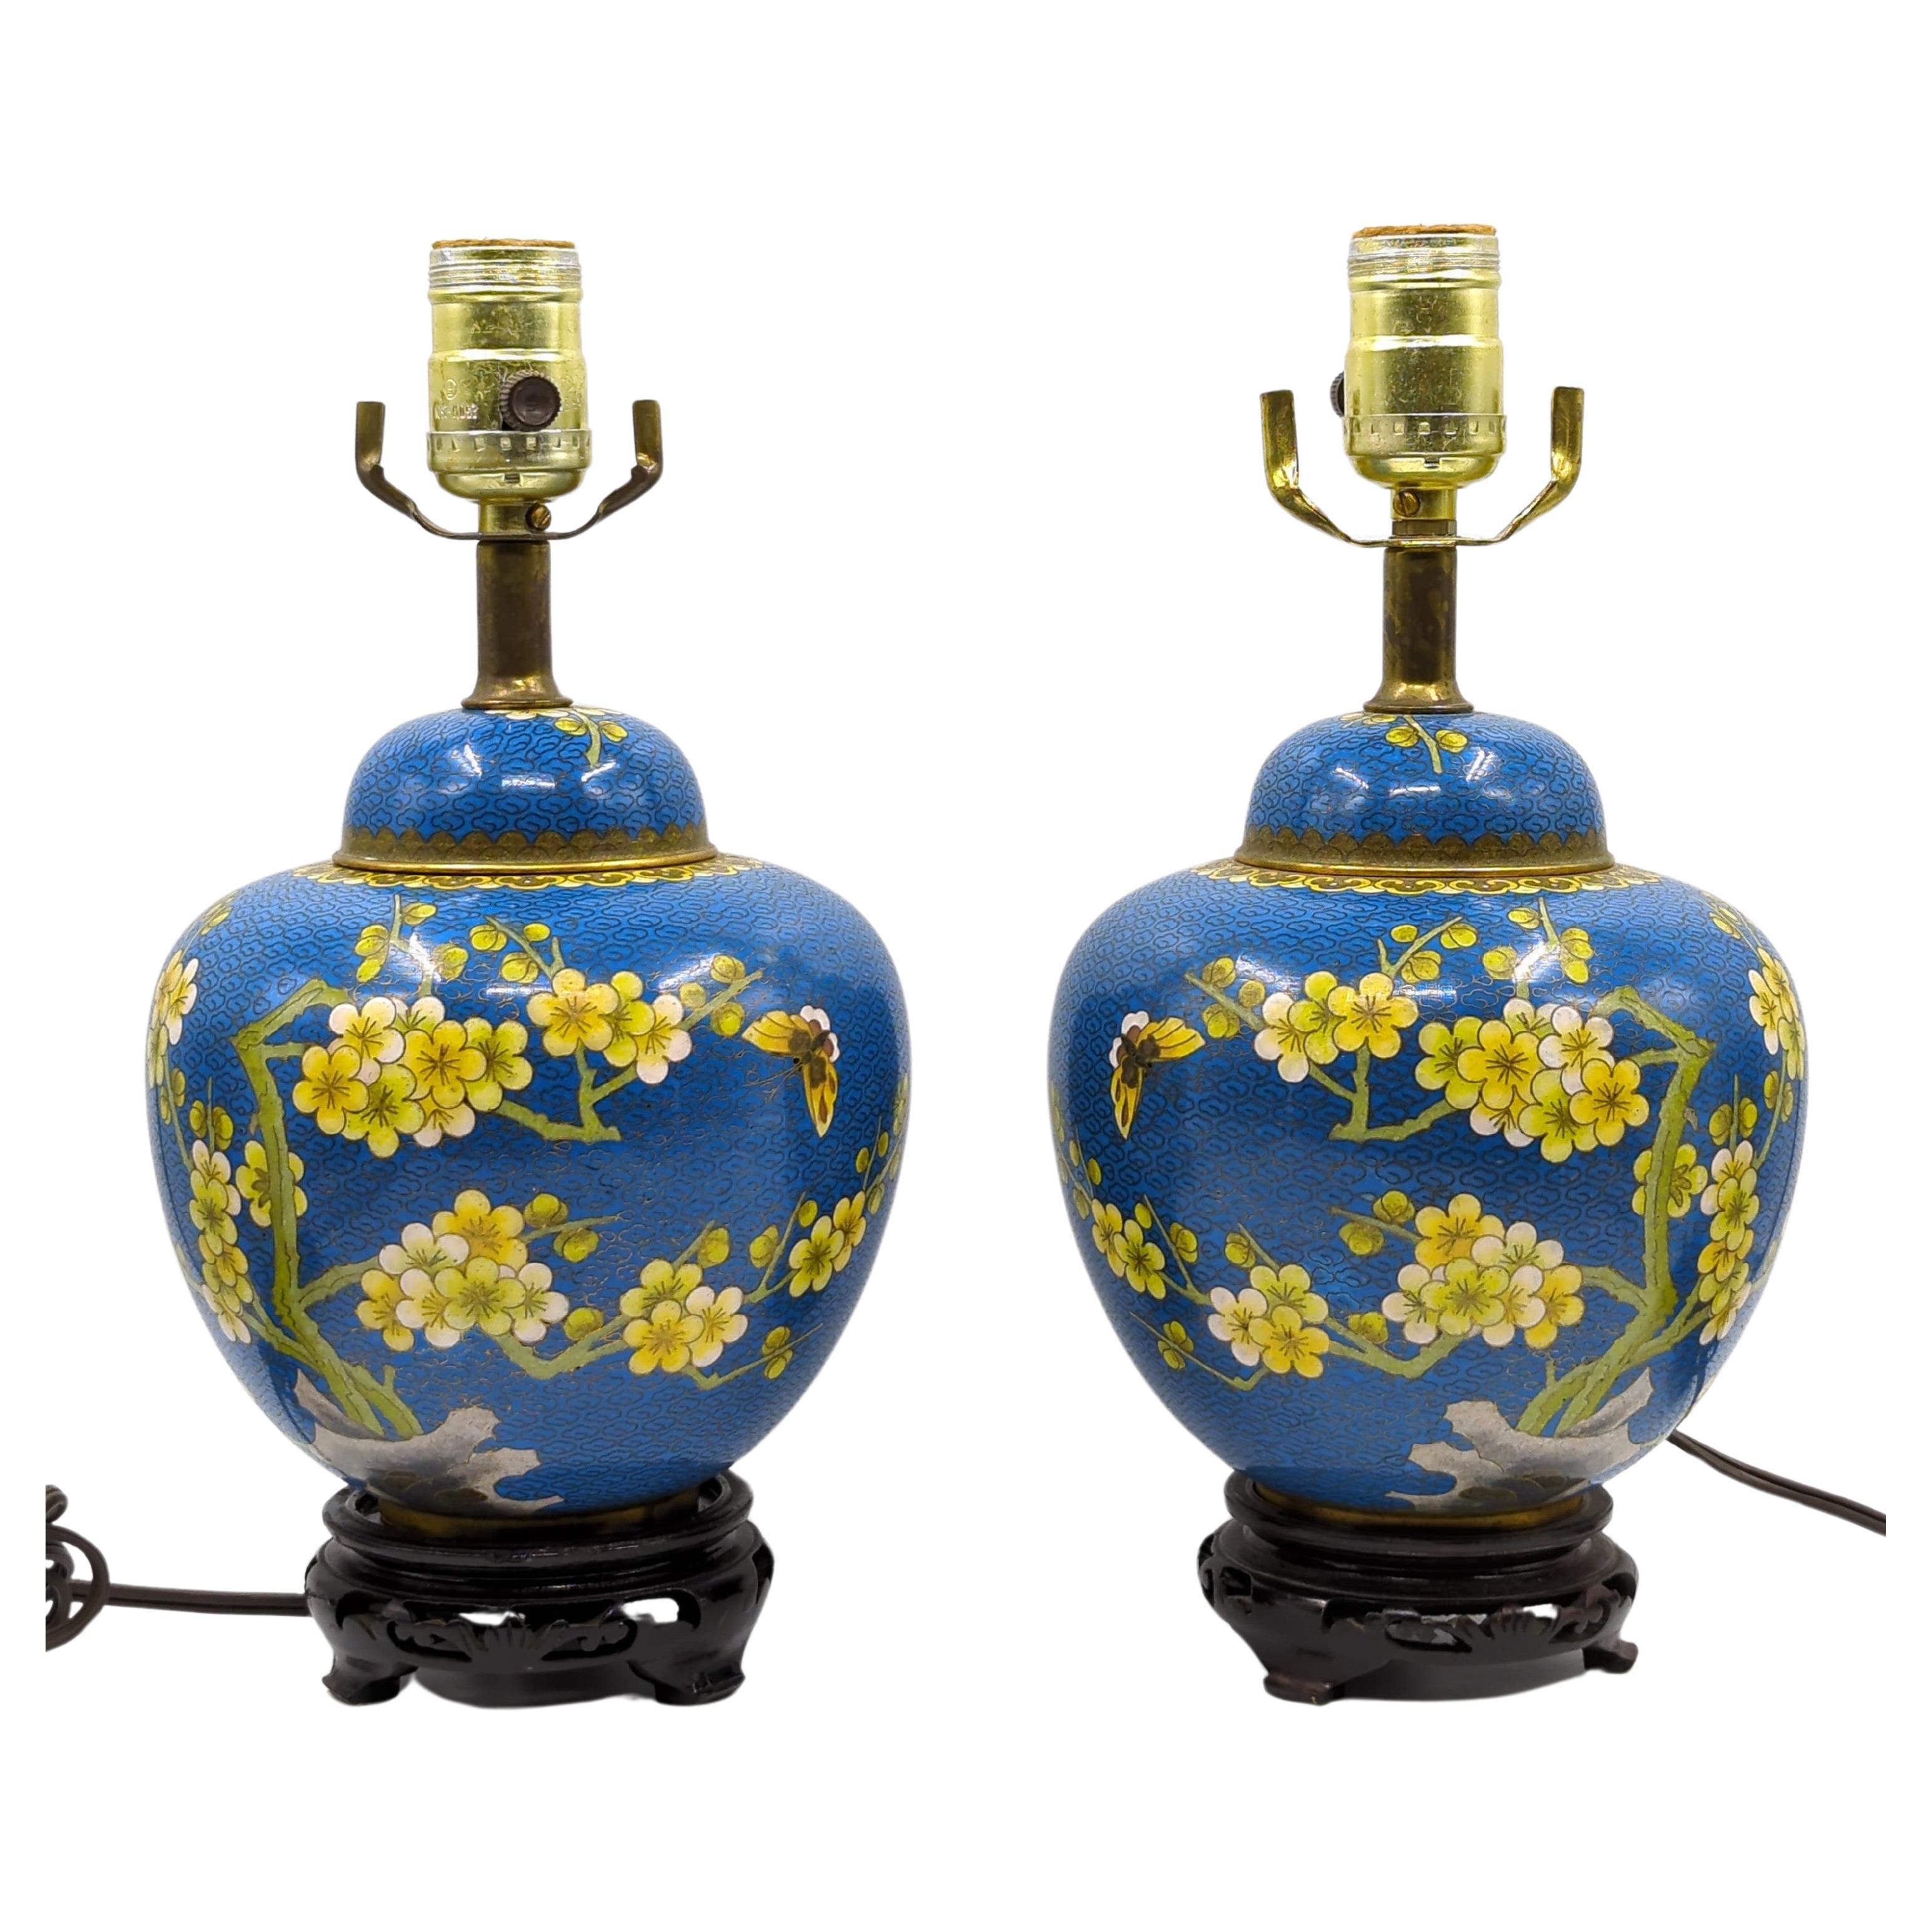 Chinese Export Pair Antique 19c Chinese Gilt Cloisonne Covered Prunus Ginger Jar Table Lamps For Sale